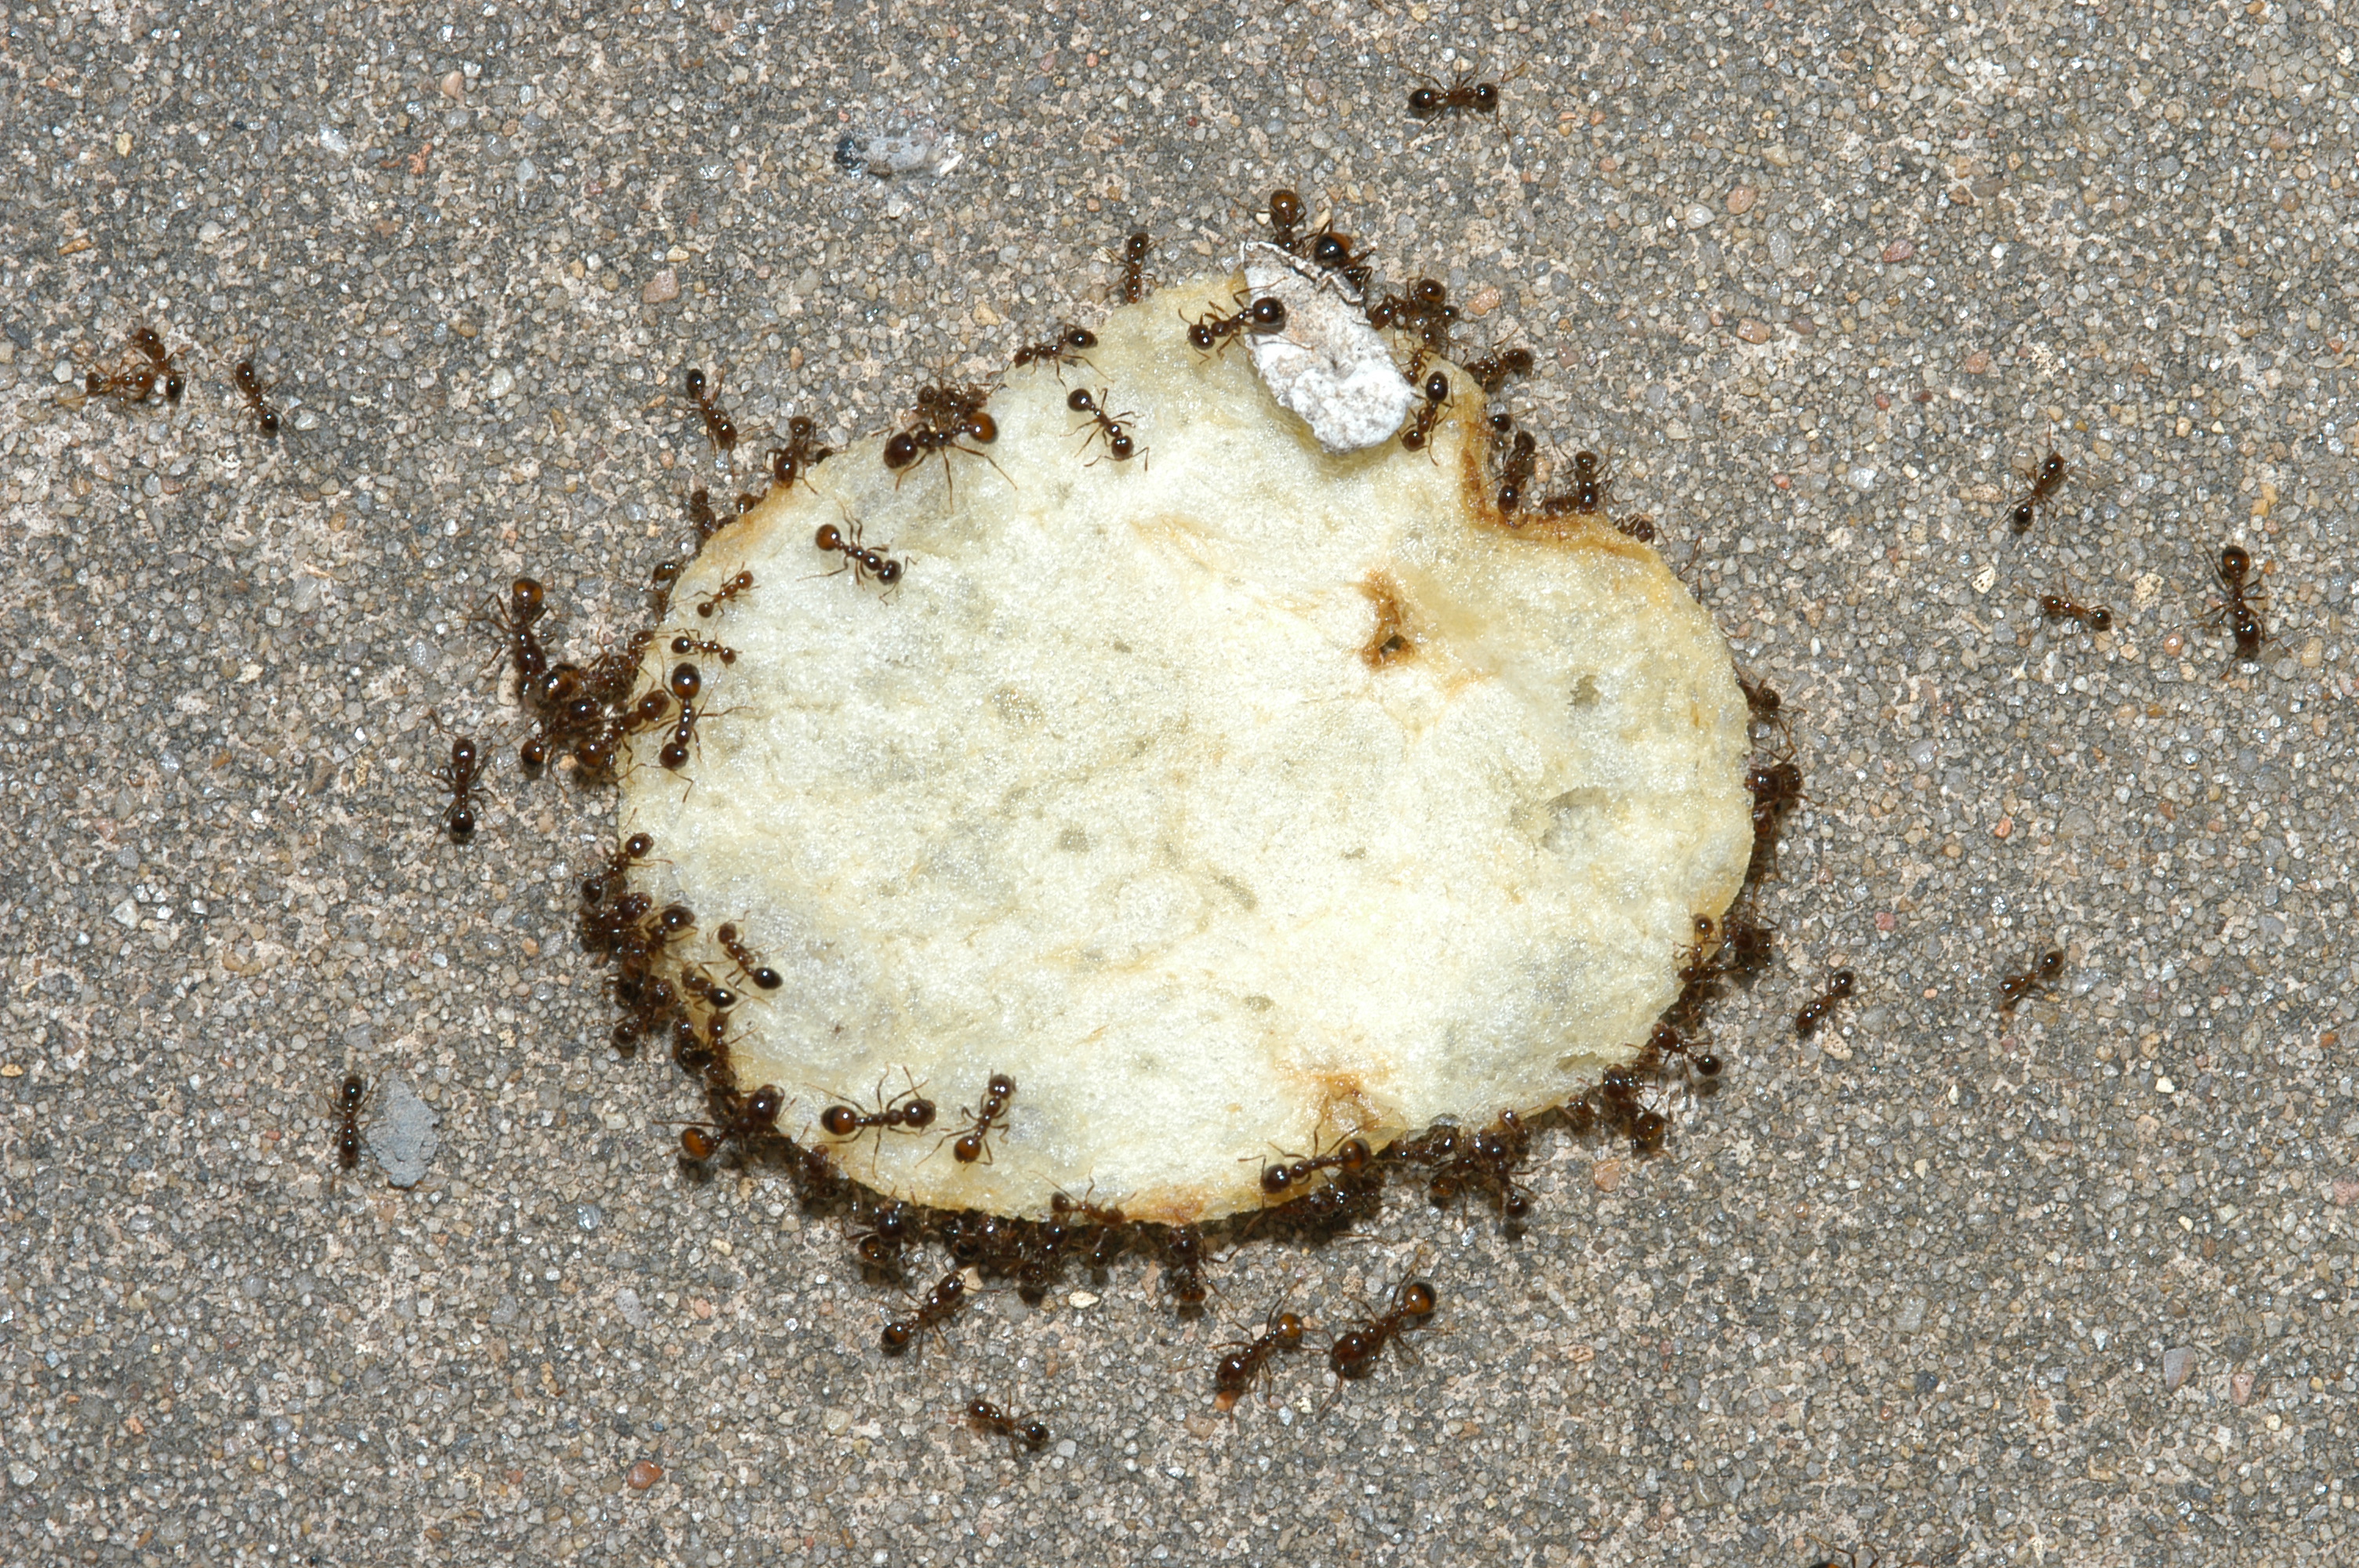 A potato chip with many ants crawling on and around it.